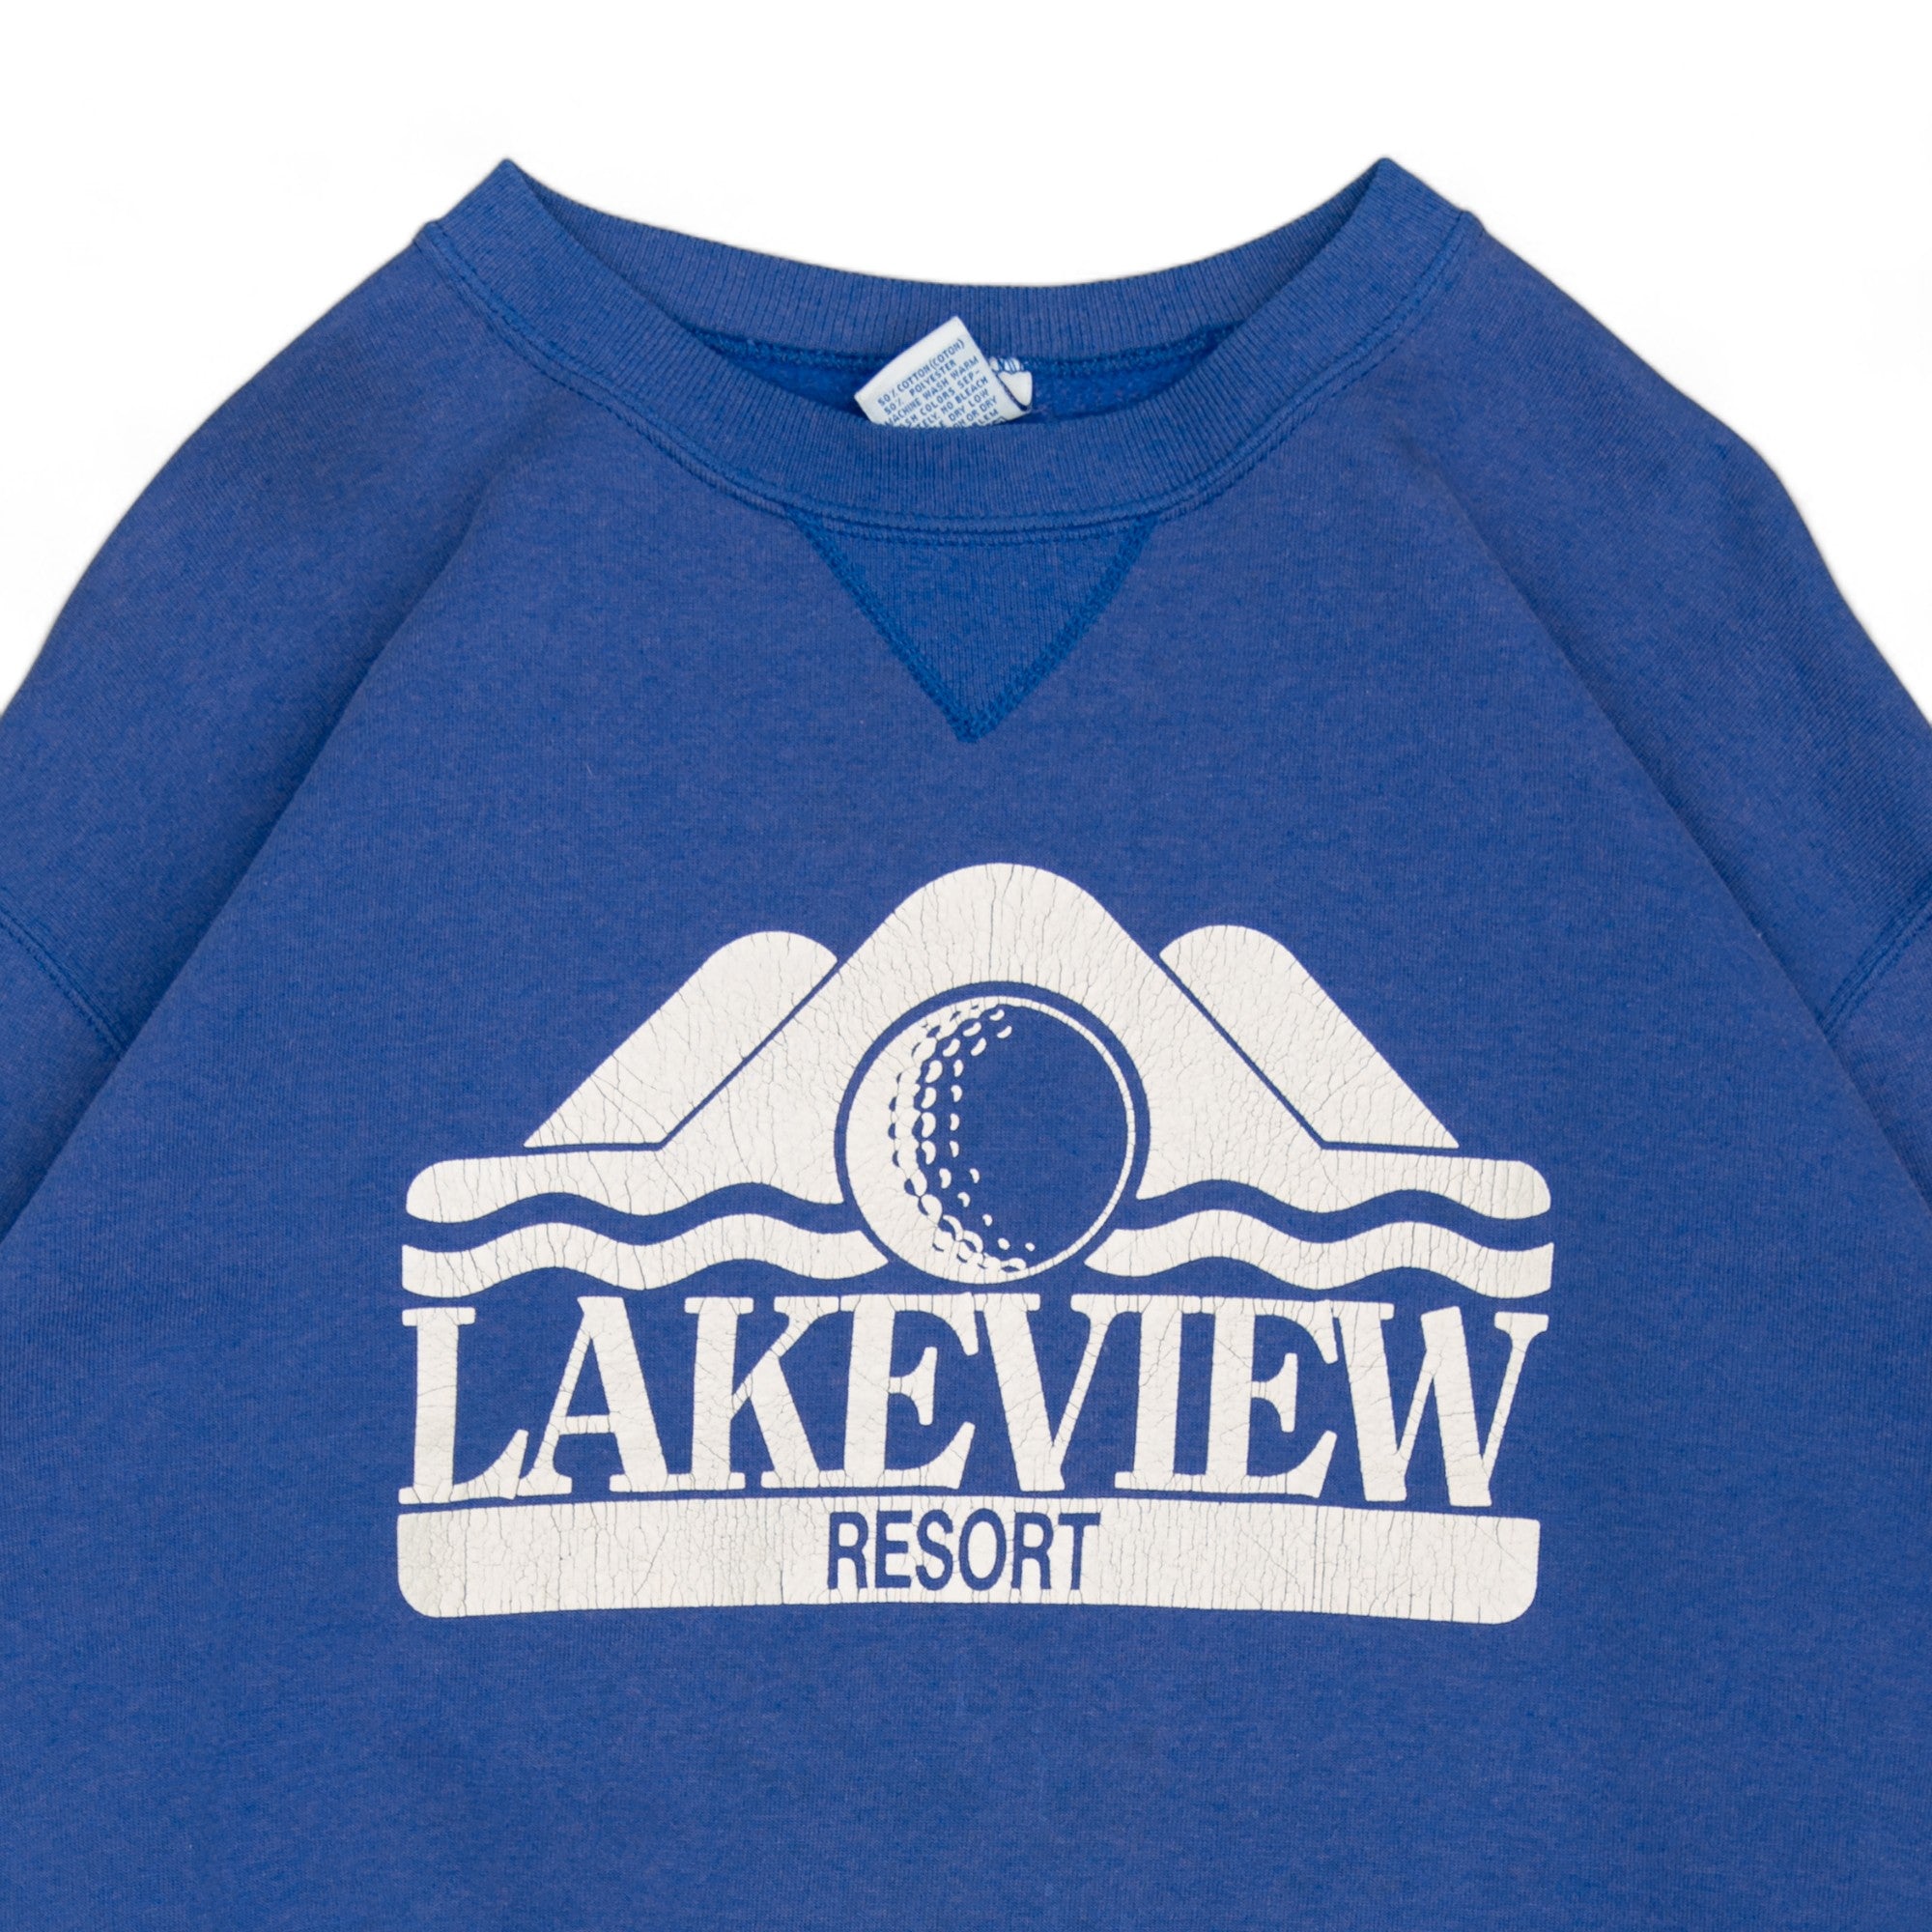 RUSSELL LAKEVIEW RESORT CREWNECK - 1990'S